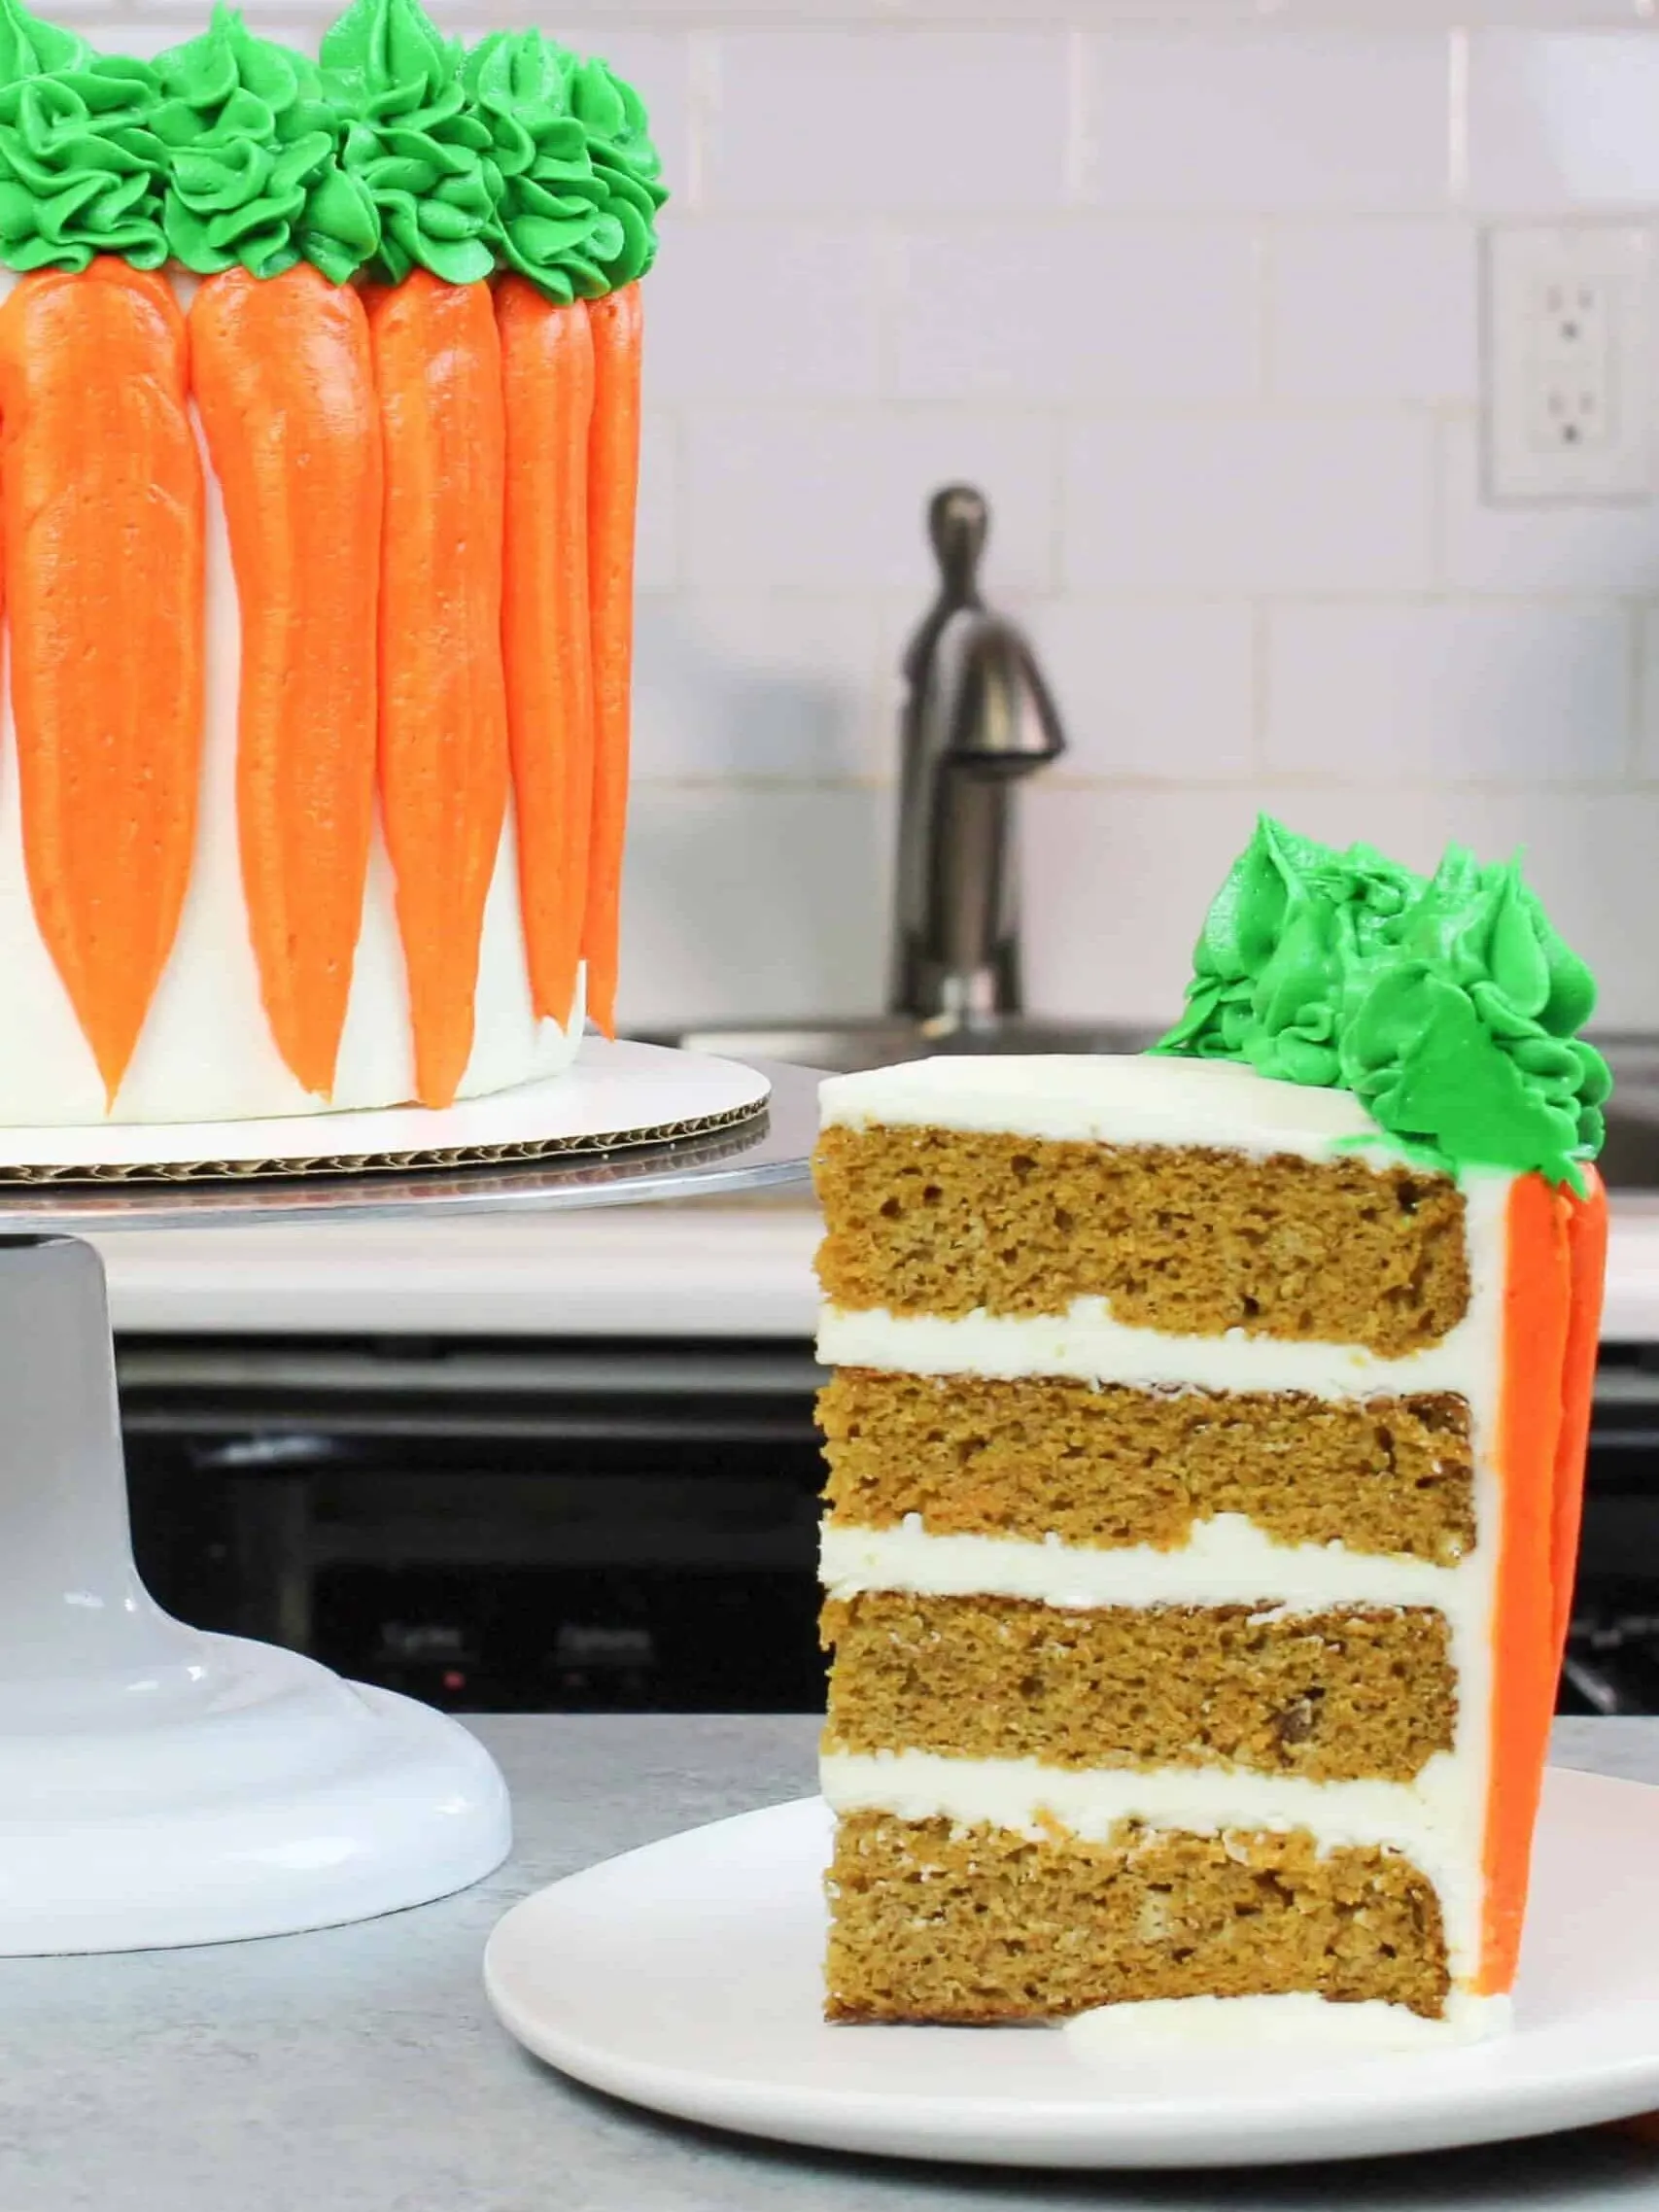 carrot cake slice frosted with cream cheese buttercream, with decorated carrot cake in background